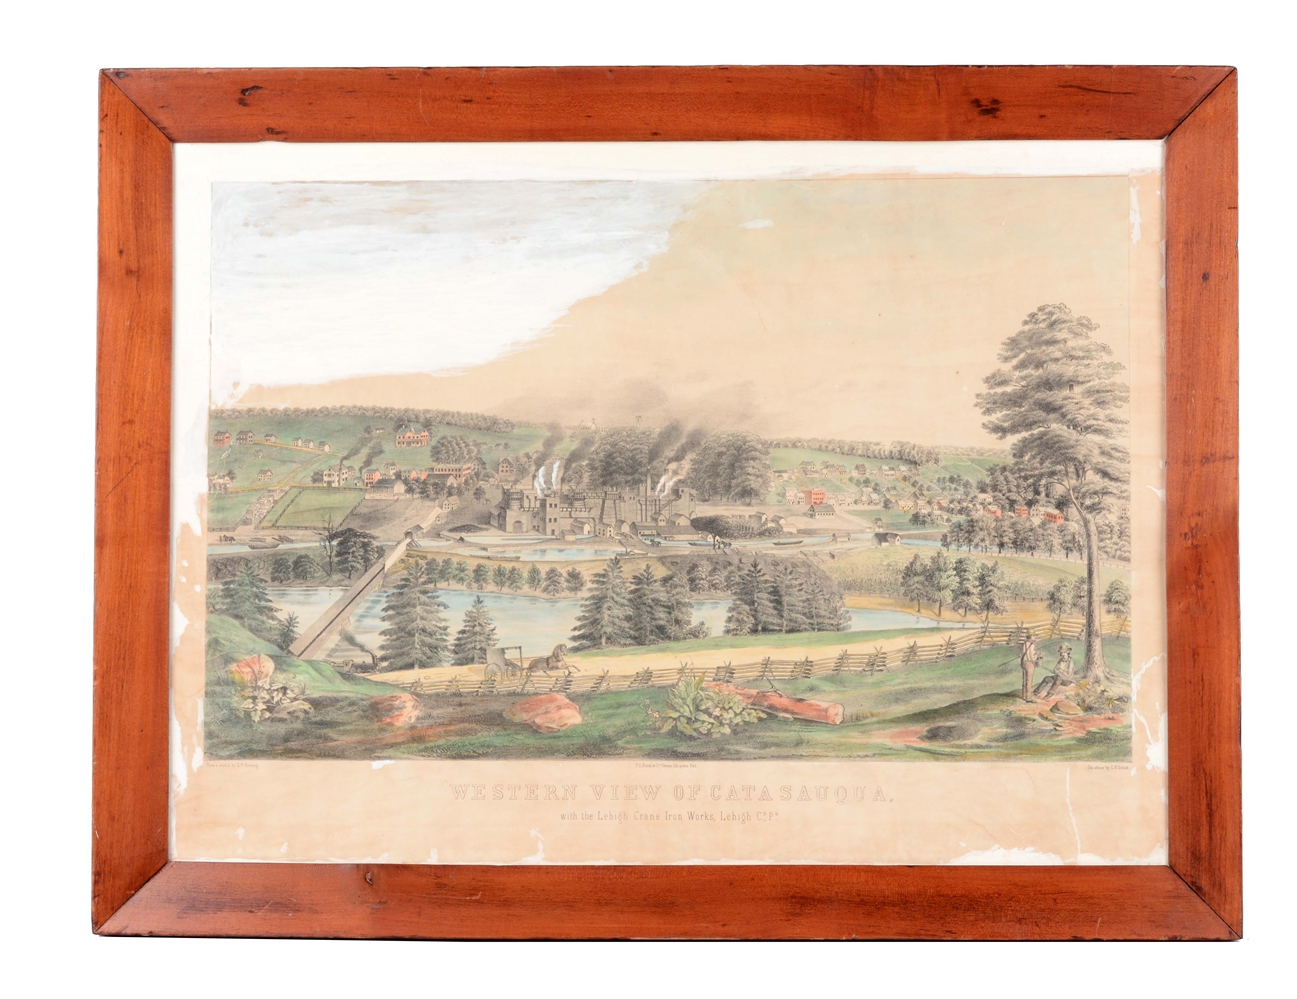 FRAMED WESTERN VIEW OF CATASAUQUA LITHOGRAPH.